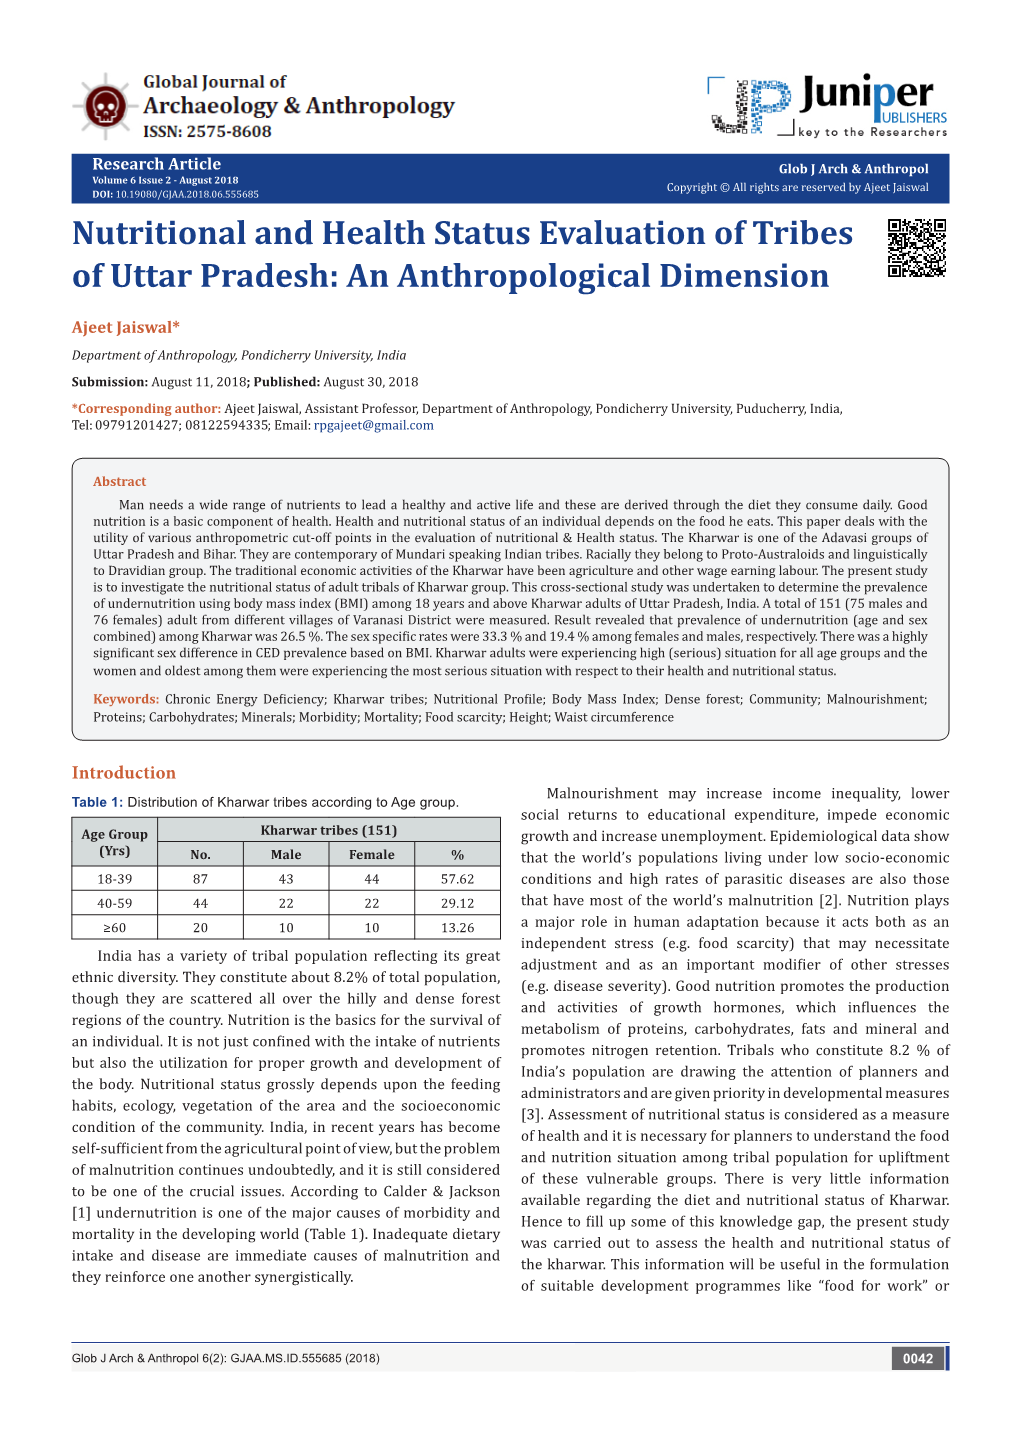 Nutritional and Health Status Evaluation of Tribes of Uttar Pradesh: an Anthropological Dimension